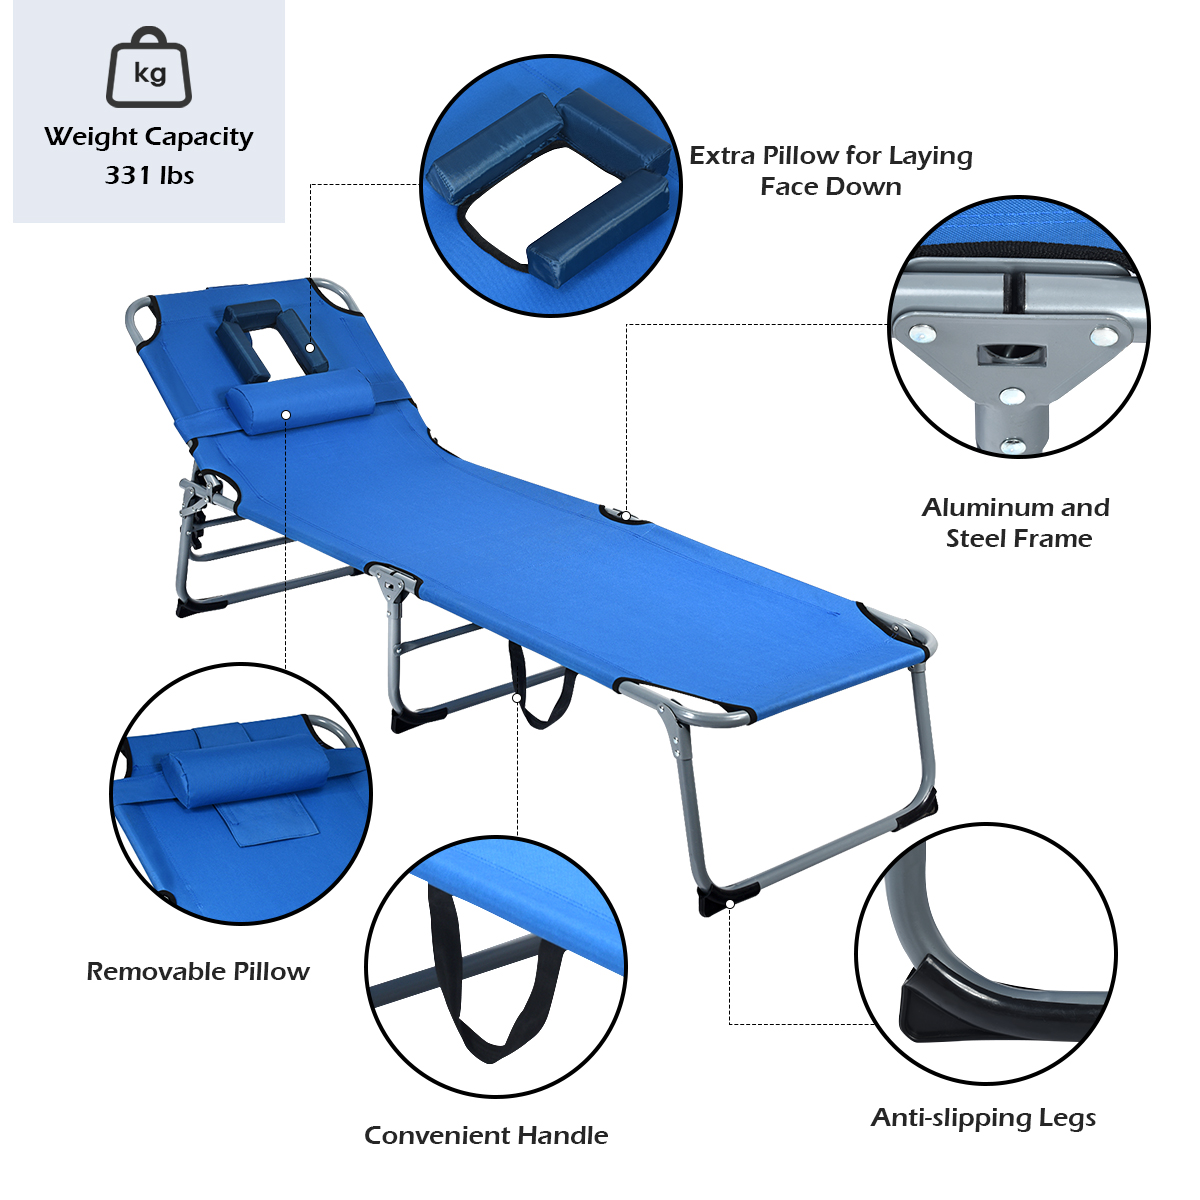 Patiojoy Foldable Lounge Chair Beach Adjustable Folding Recliner with Pillow Cavity Blue, Steel - image 5 of 9